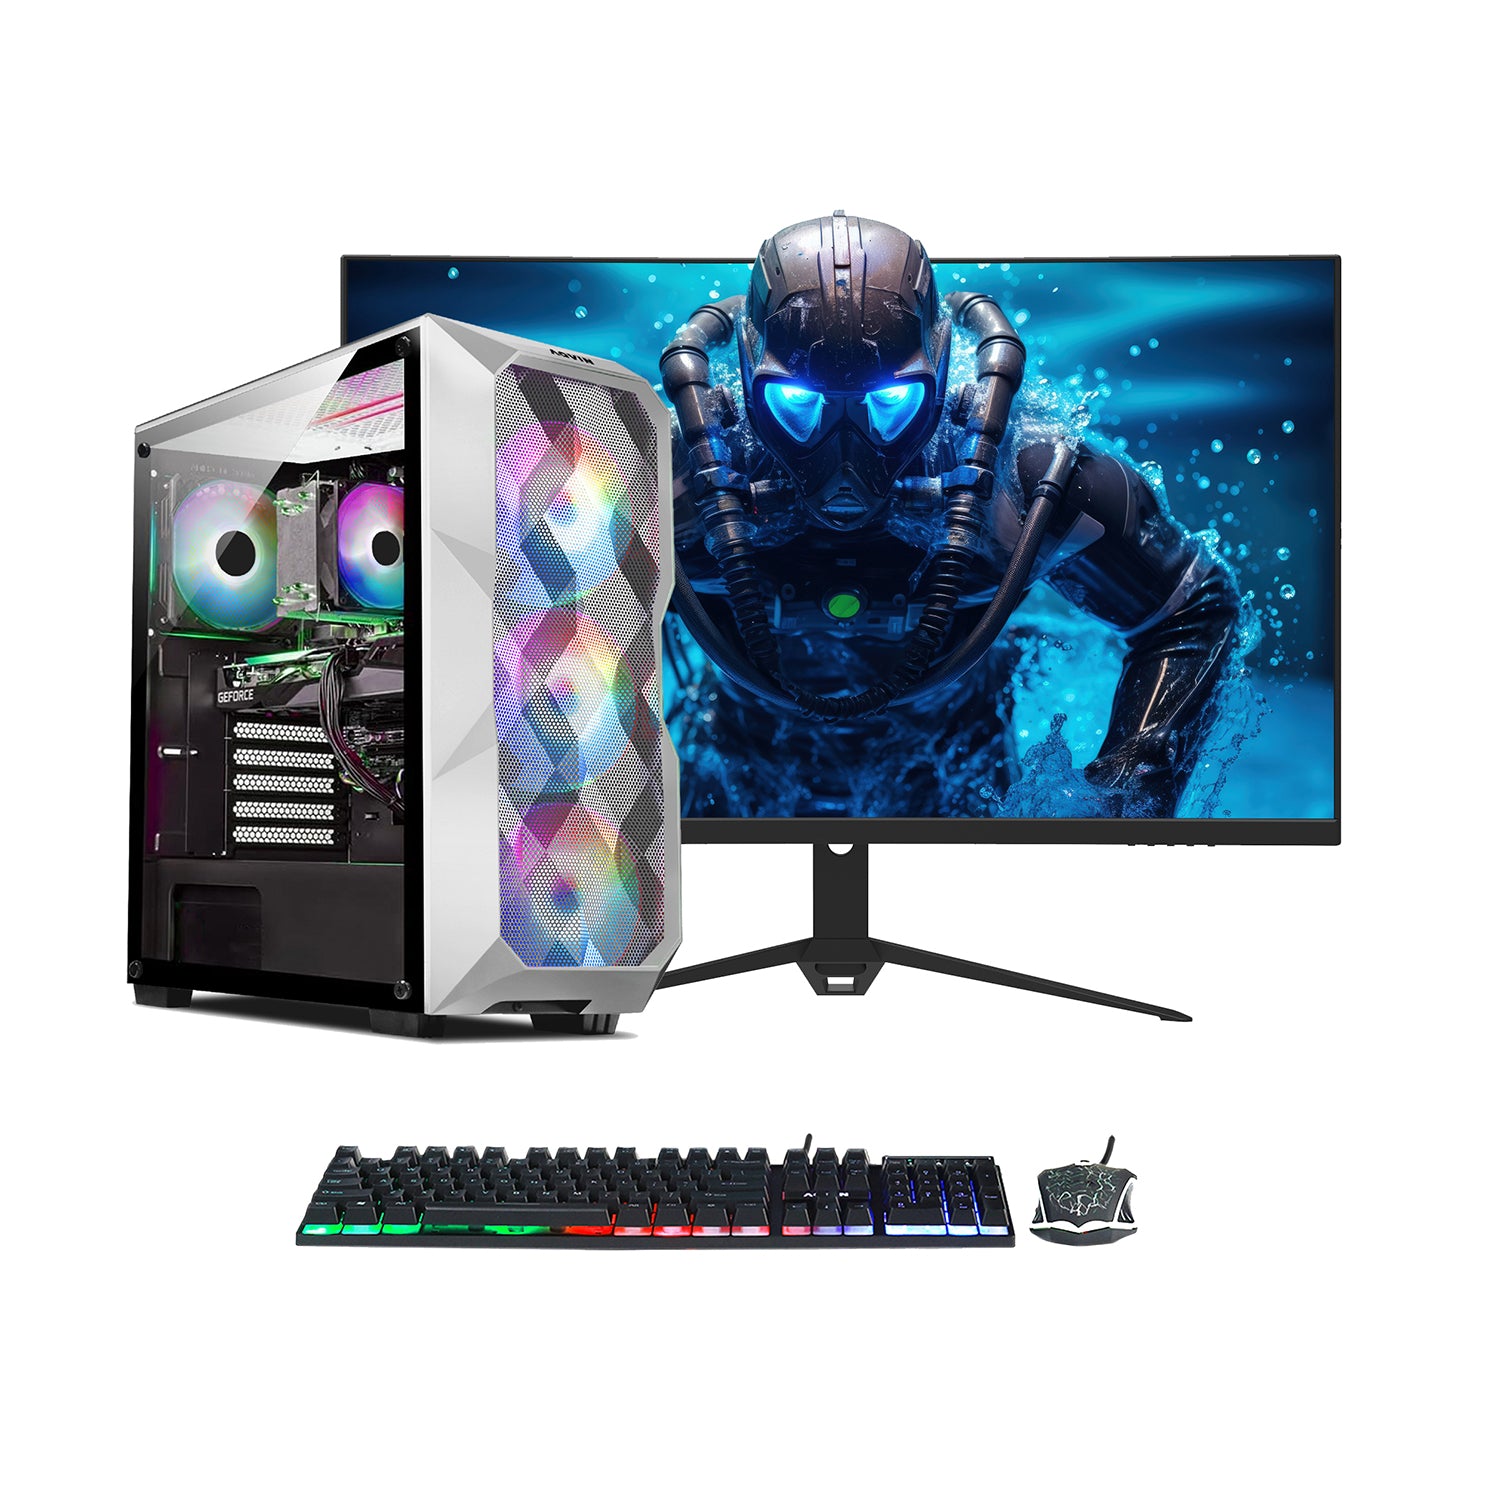 AQVIN AQW70 Gaming Desktop Computer PC Tower - New 27 inch Curved Gaming Monitor (Intel Core i7 Processor up to 4.00 GHz/ 32GB DDR4 RAM/ 1TB - 2TB SSD/ GeForce RTX 3050, 3060 Graphics Card/ Windows 10 Pro) WiFi Ready